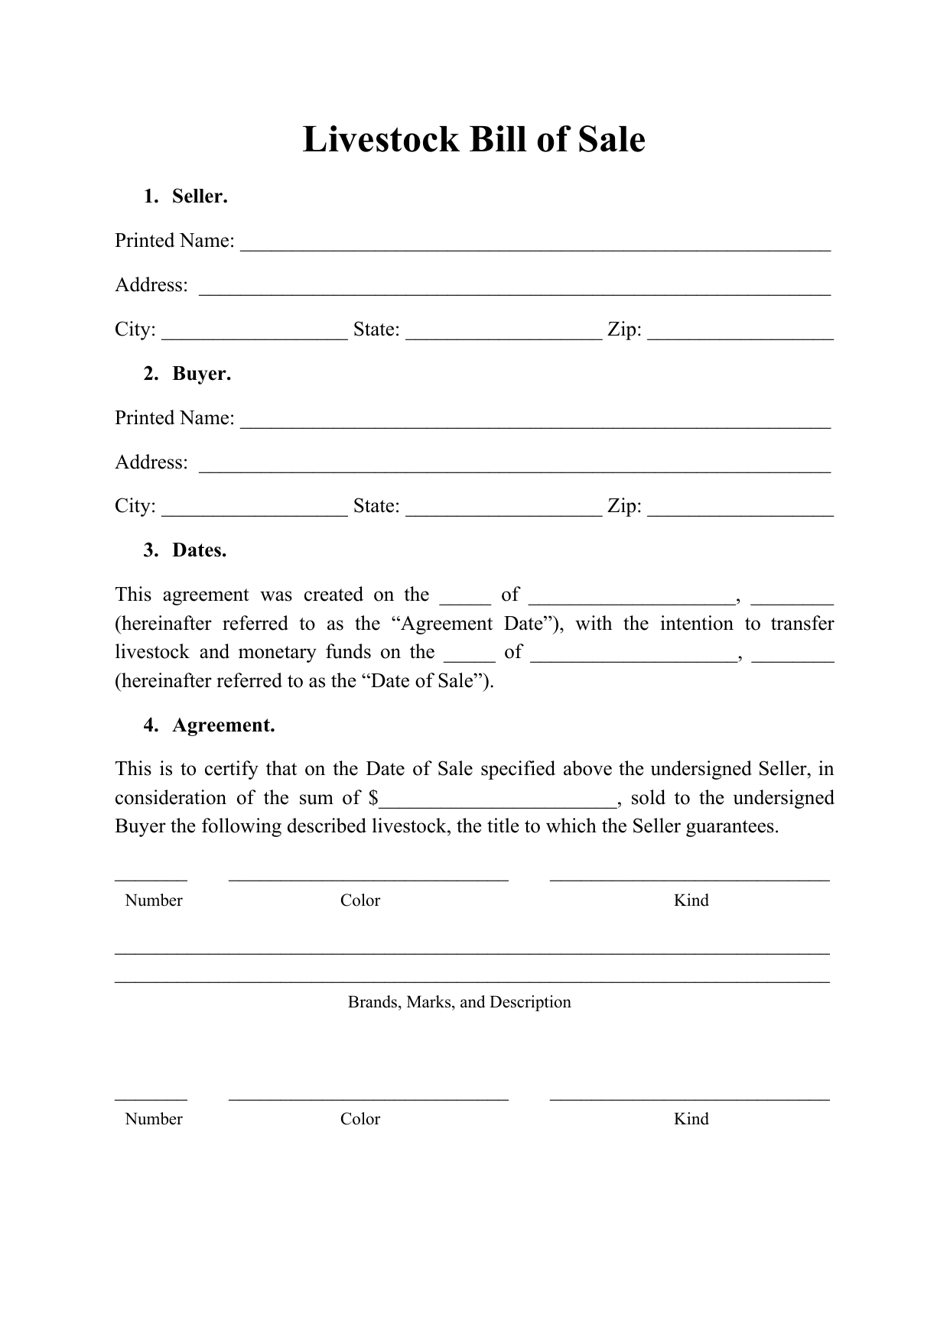 Livestock Bill of Sale Form Fill Out Sign Online and Download PDF